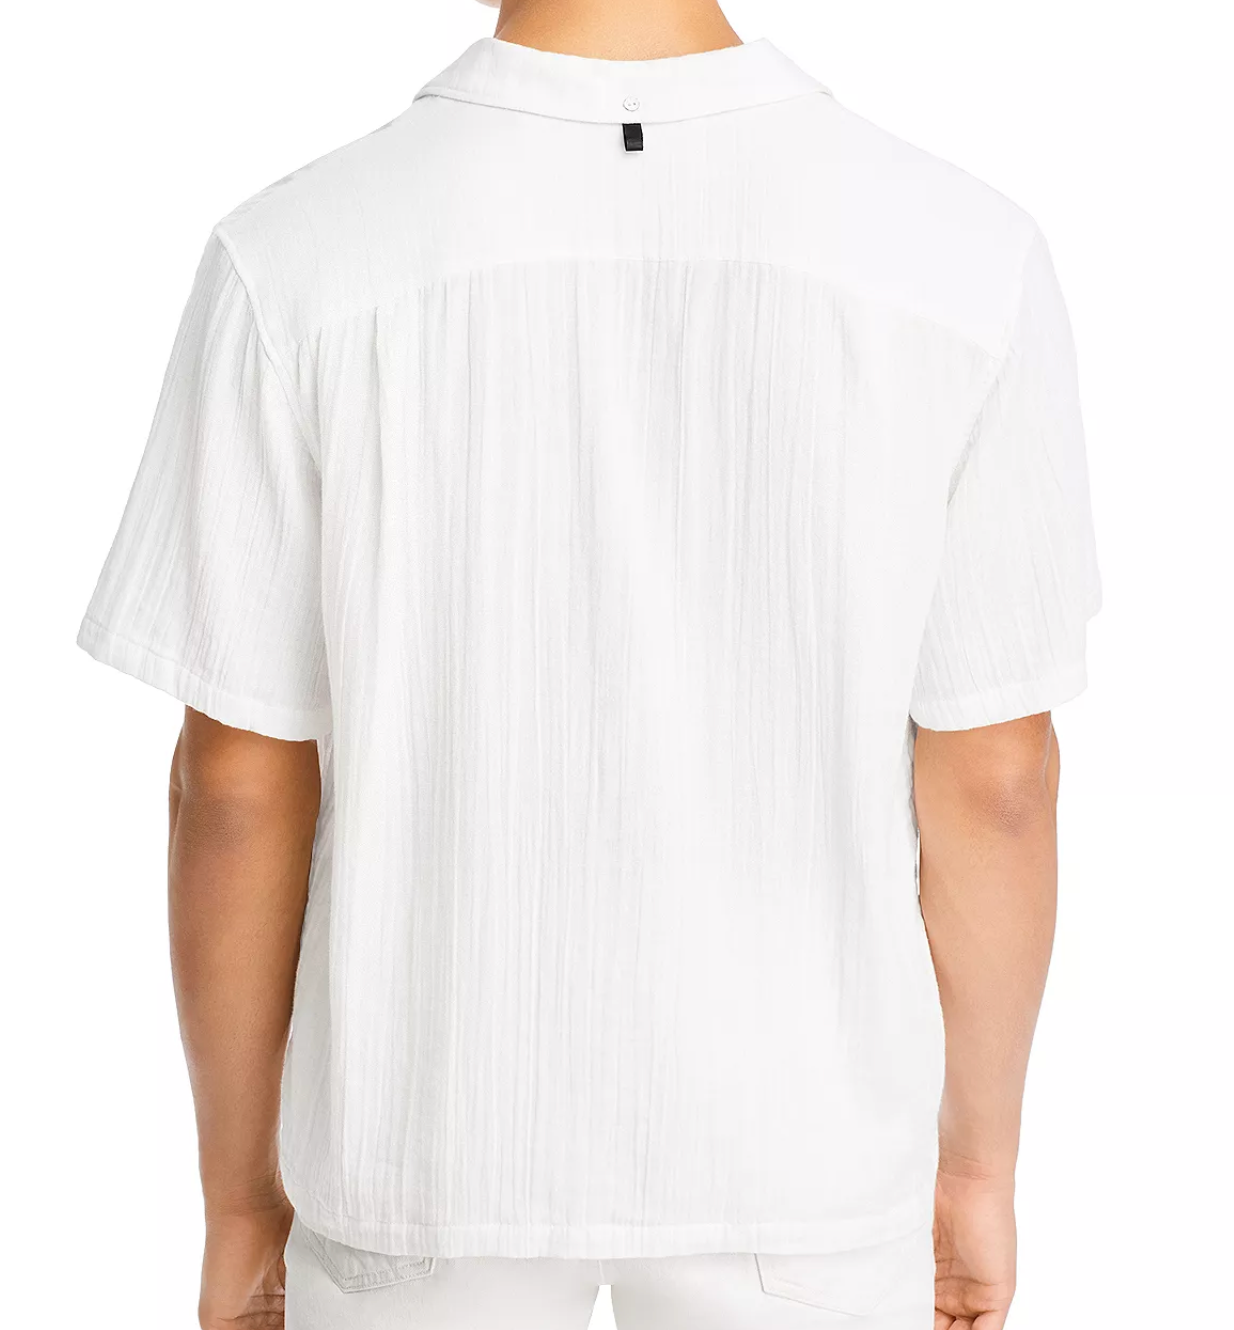 Rag & Bone Avery Cotton Gauze Relaxed Fit Button Down Camp Shirt, White